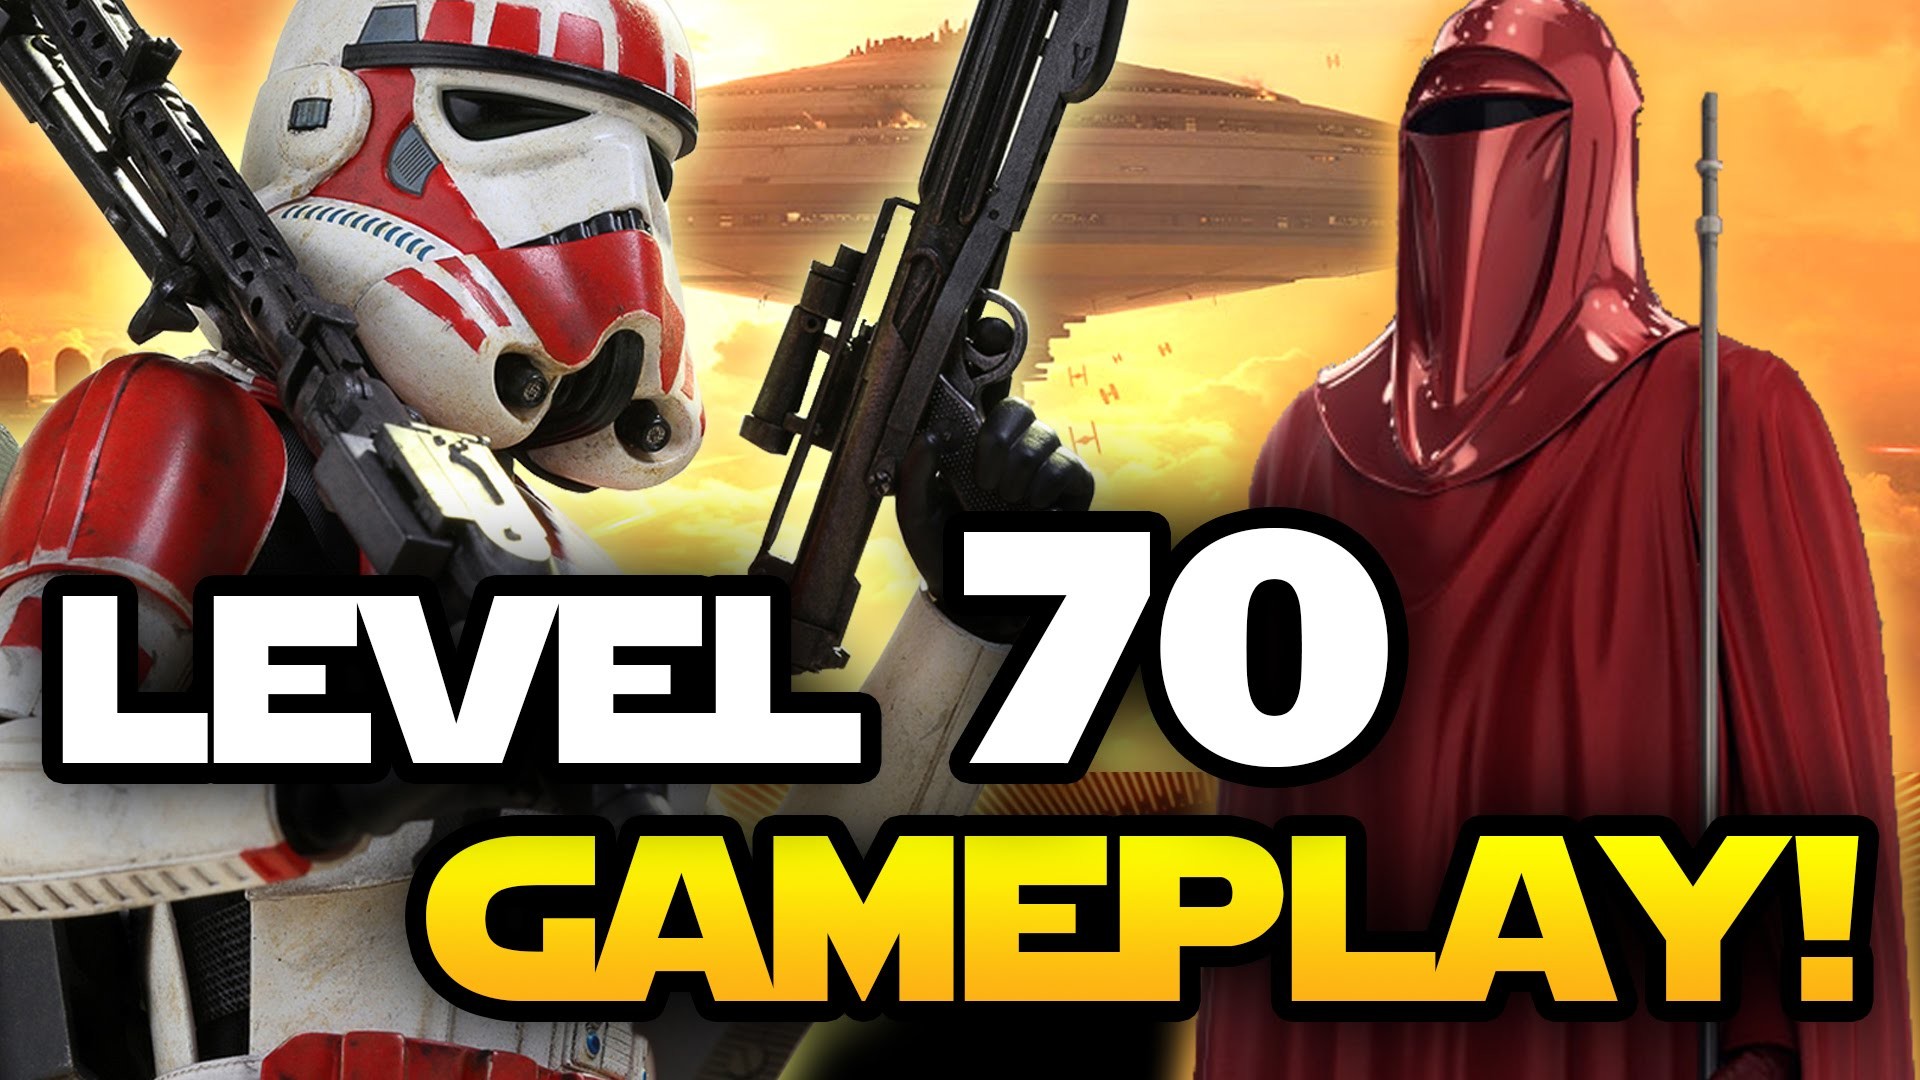 1920x1080 Star Wars Battlefront Bespin DLC: RANK 70 GAMEPLAY! Royal Guards, Shock  Trooper, Wing Guard - YouTube